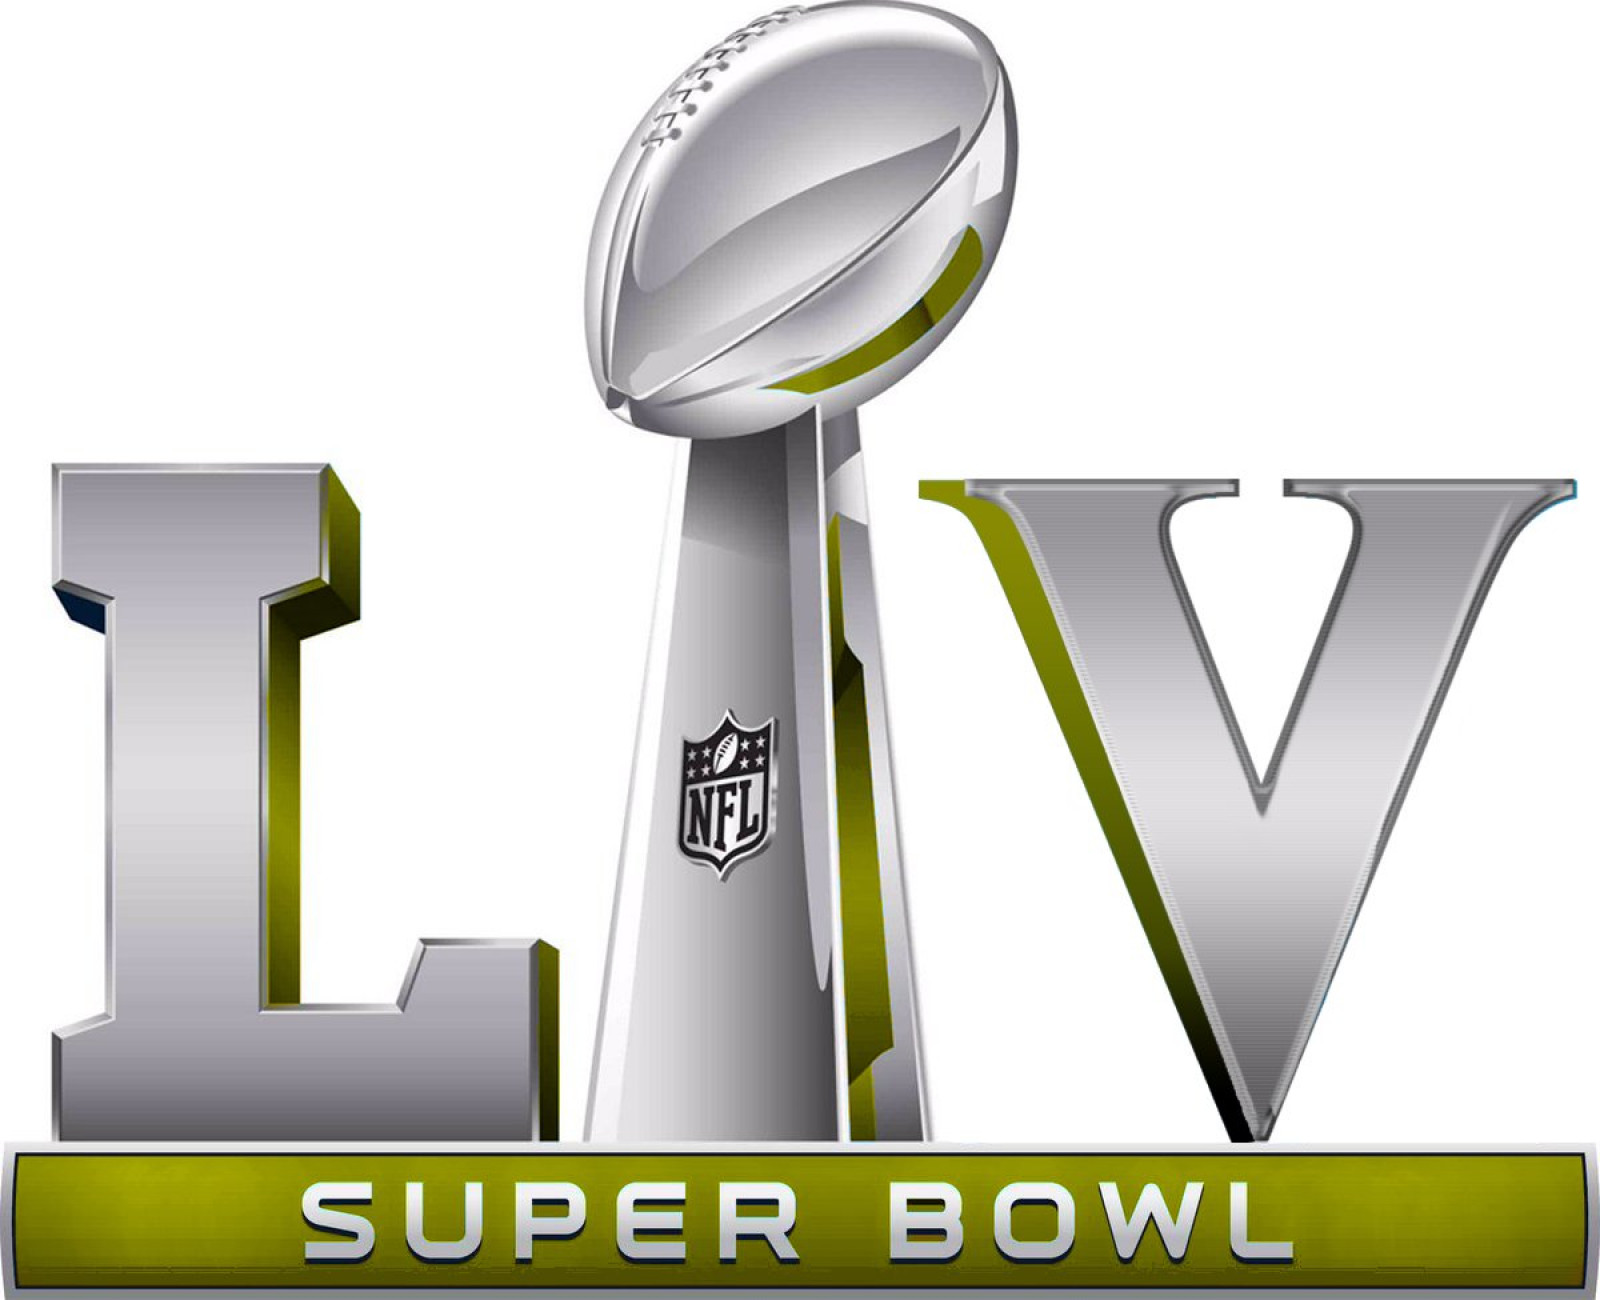 Cover image for TV advertising vs. lockdown hiatus: Welcome to the Super Bowl LV